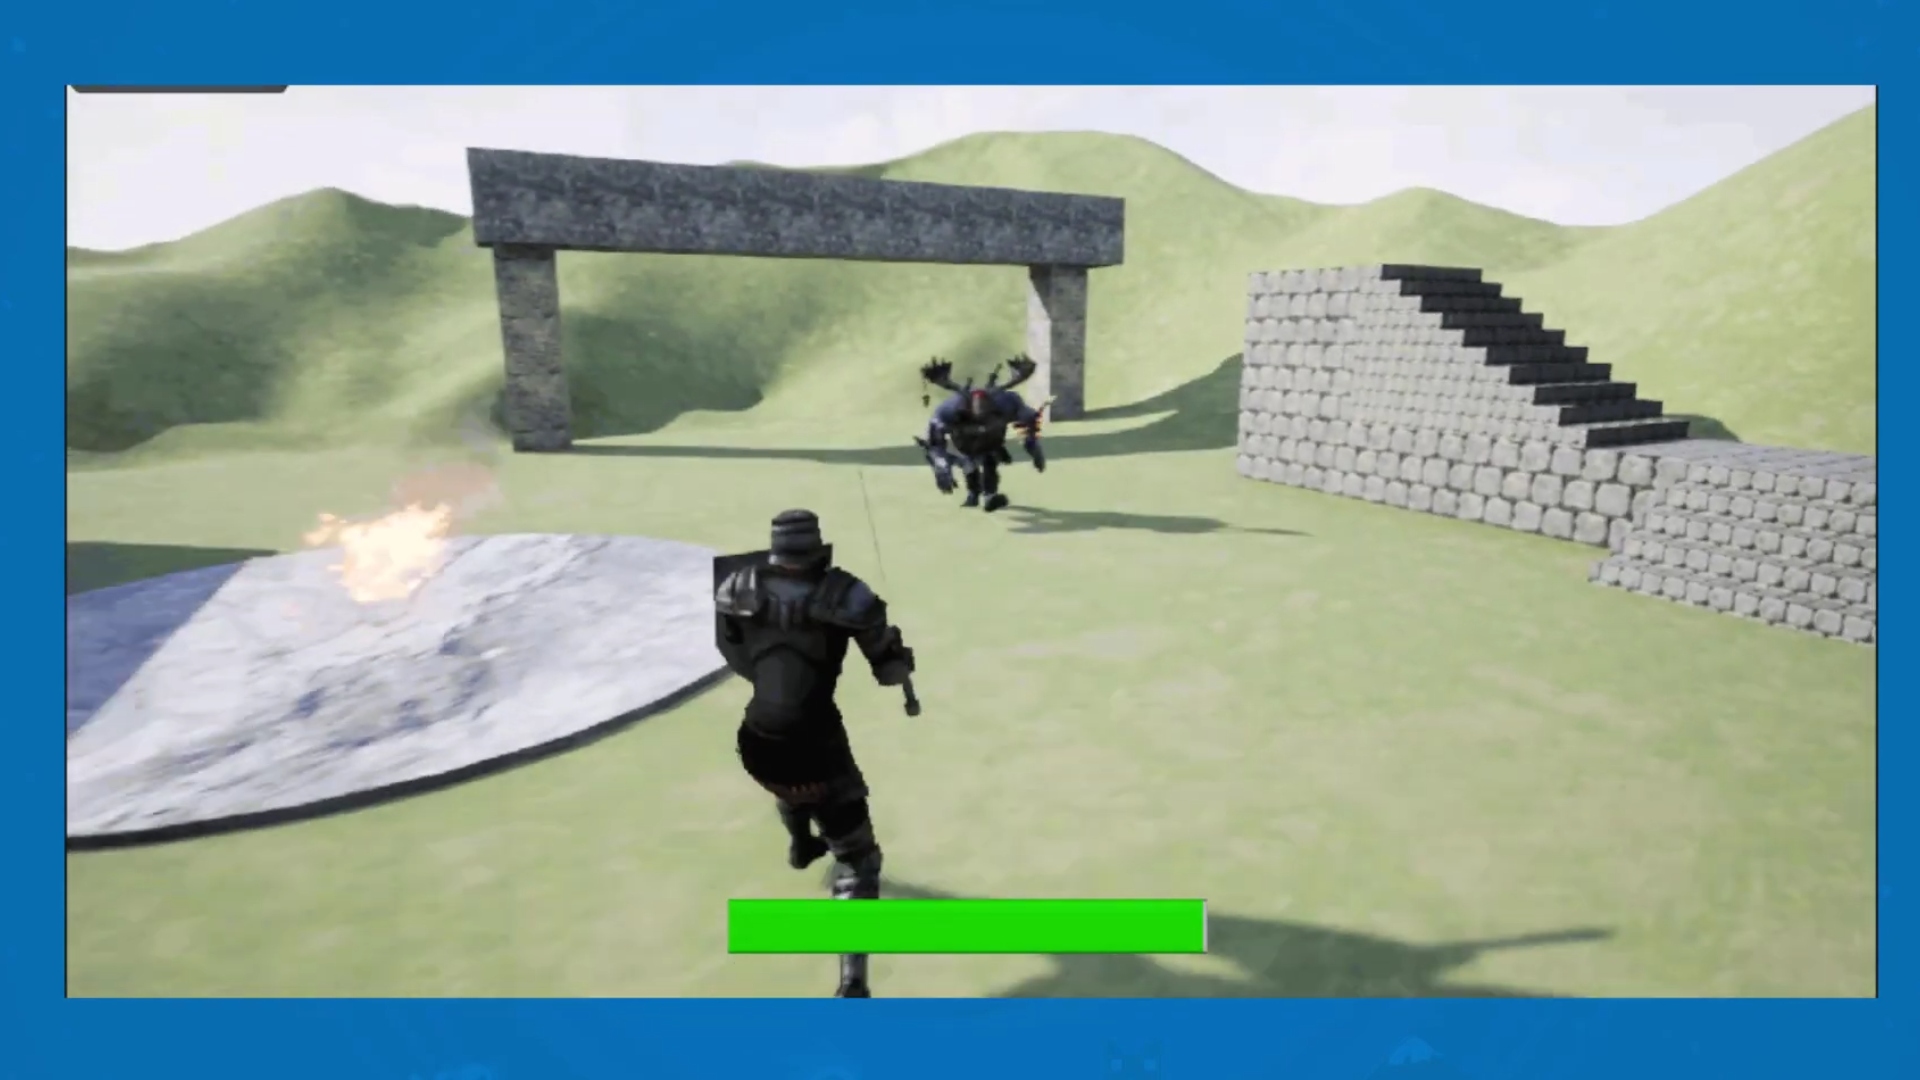 Learn to make an RPG game at 96% off in Unreal Engine Humble Bundle